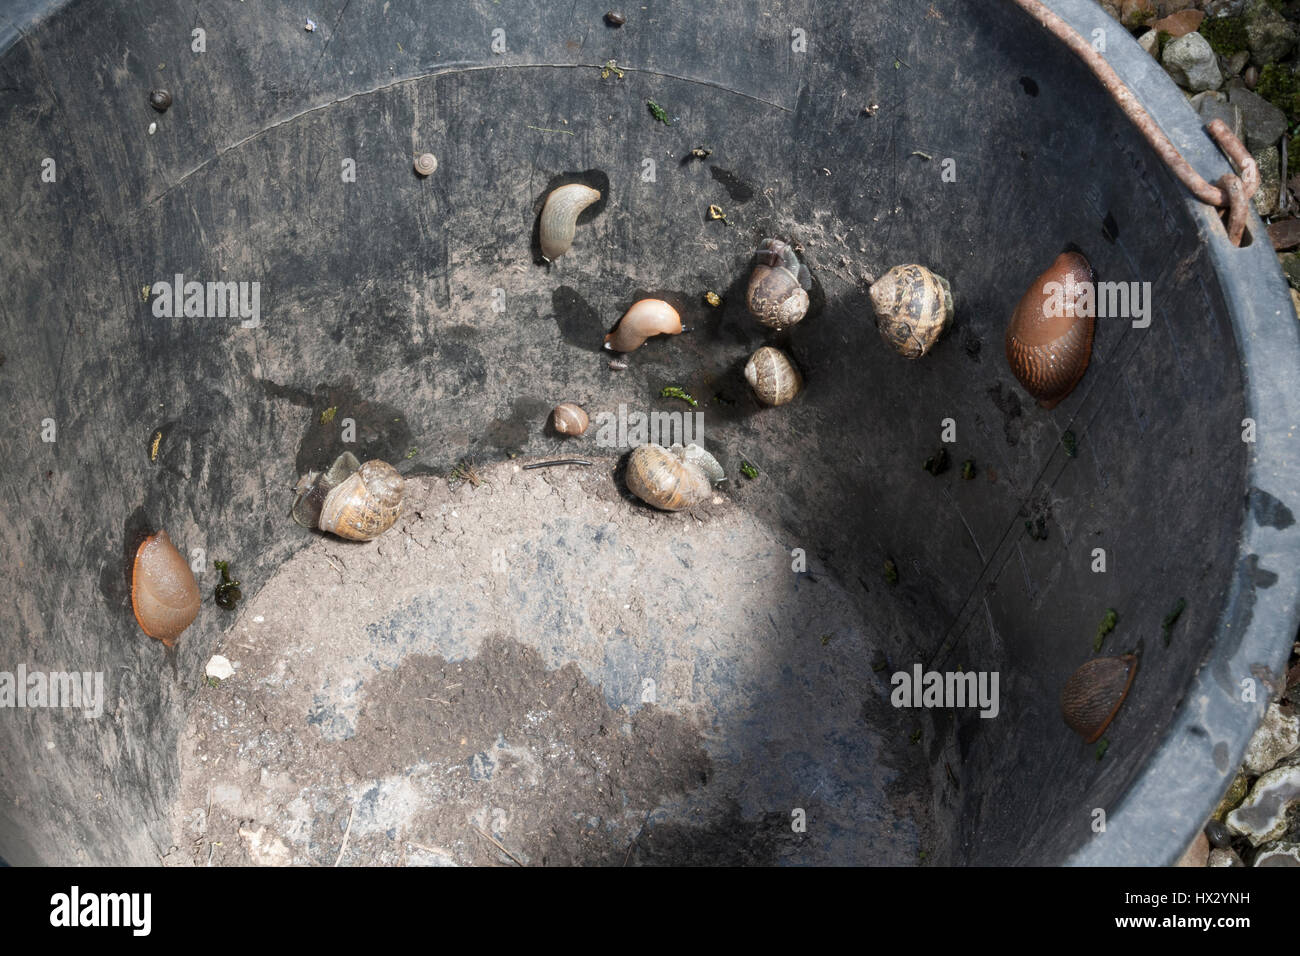 Slugs and snails in an upturned bucket Stock Photo